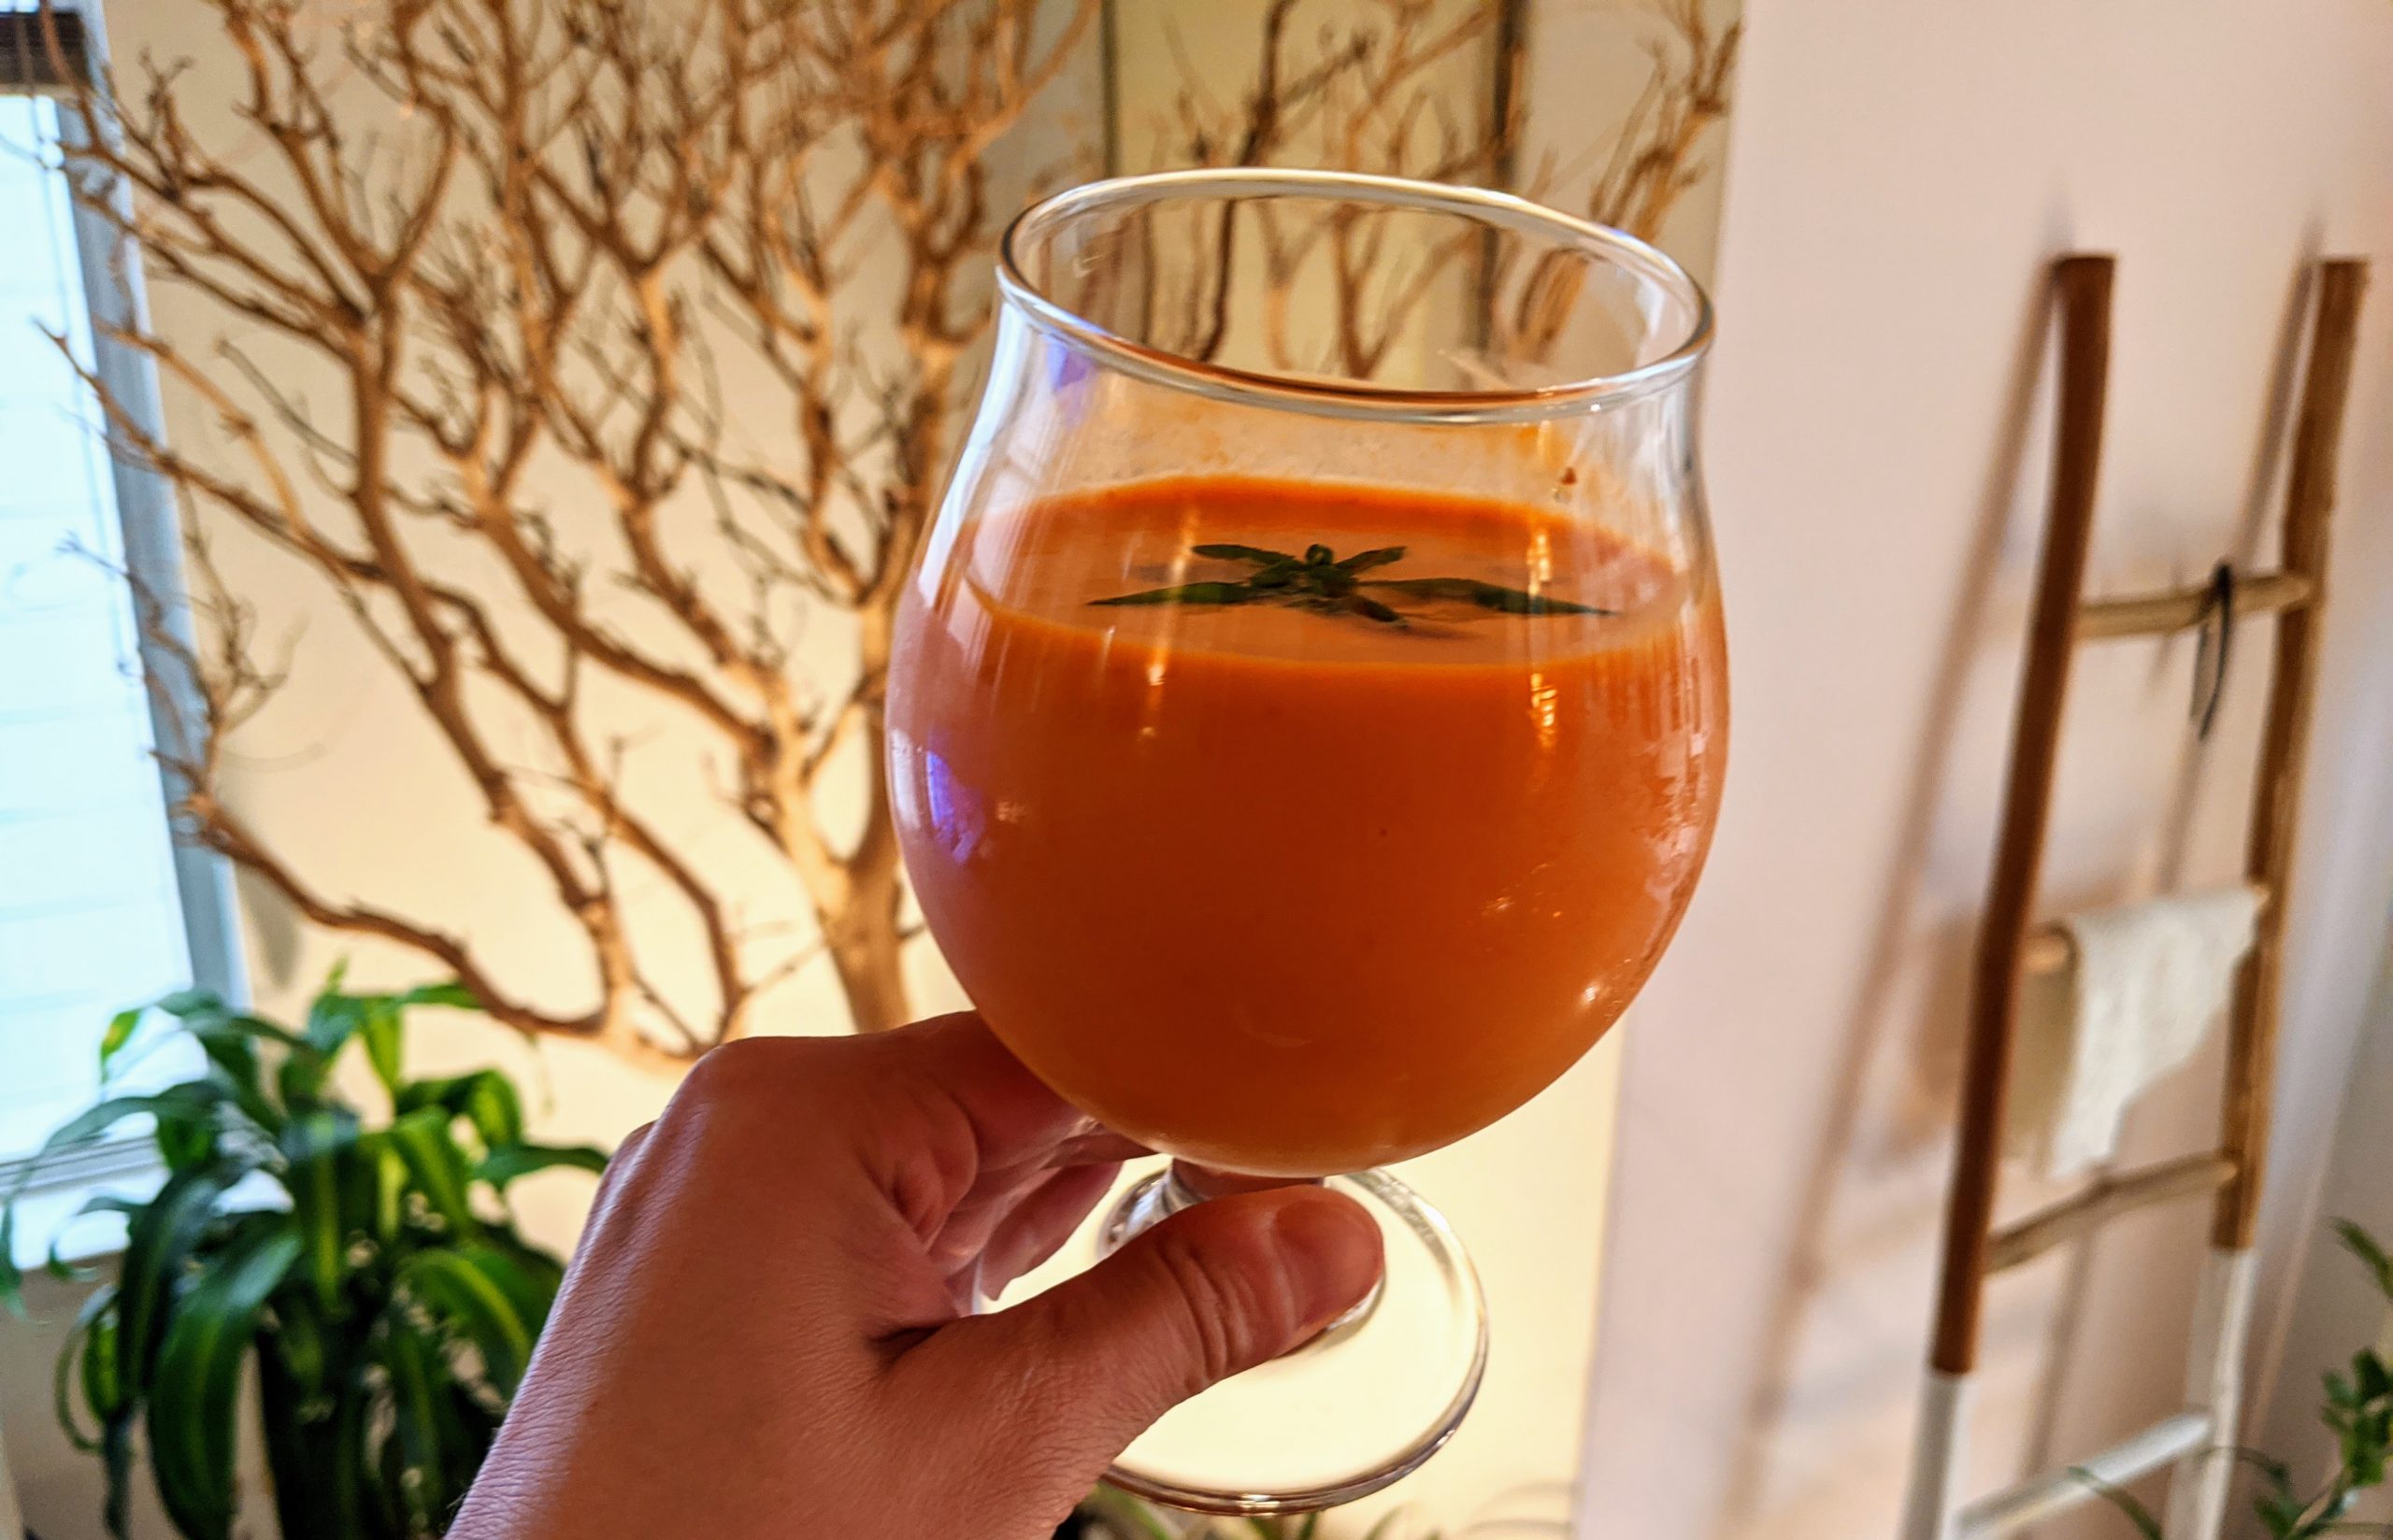 A glass full of Andalusian Gazpacho.